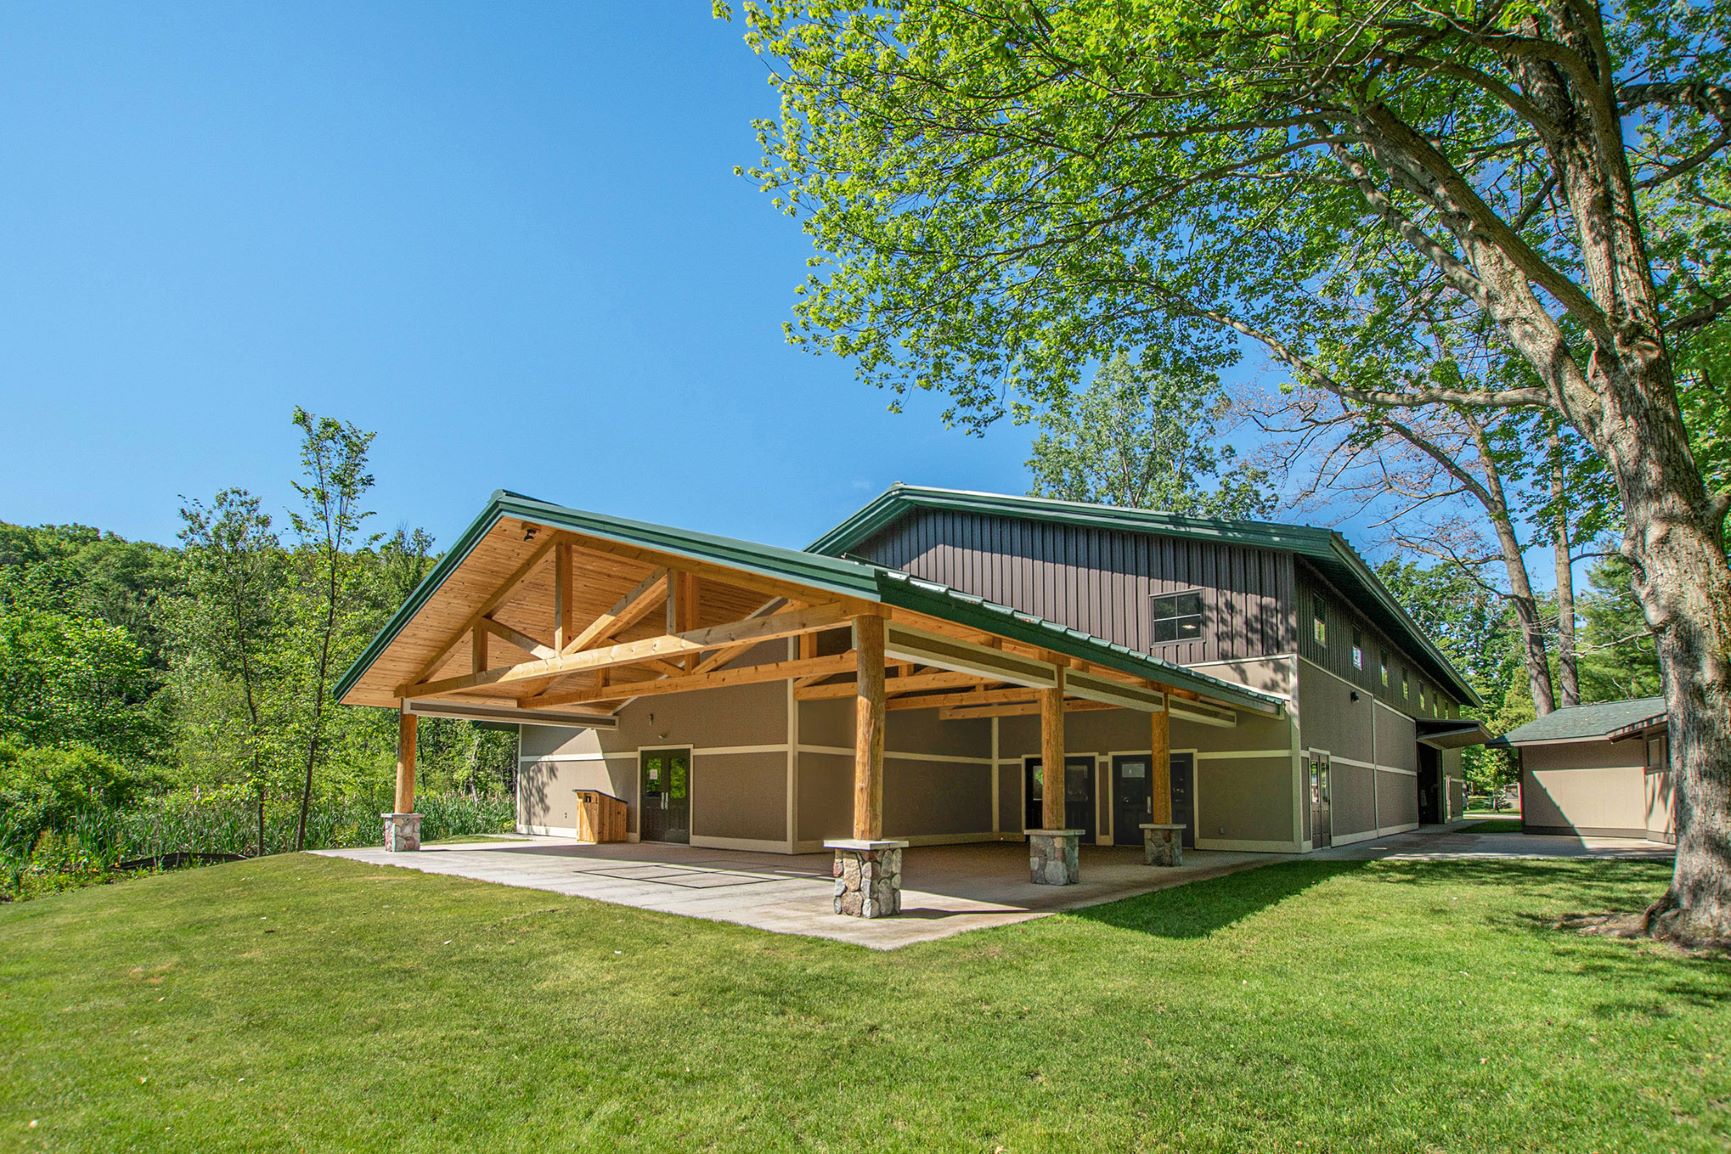 Jacobs Recreation Pavilion at Camp Henry